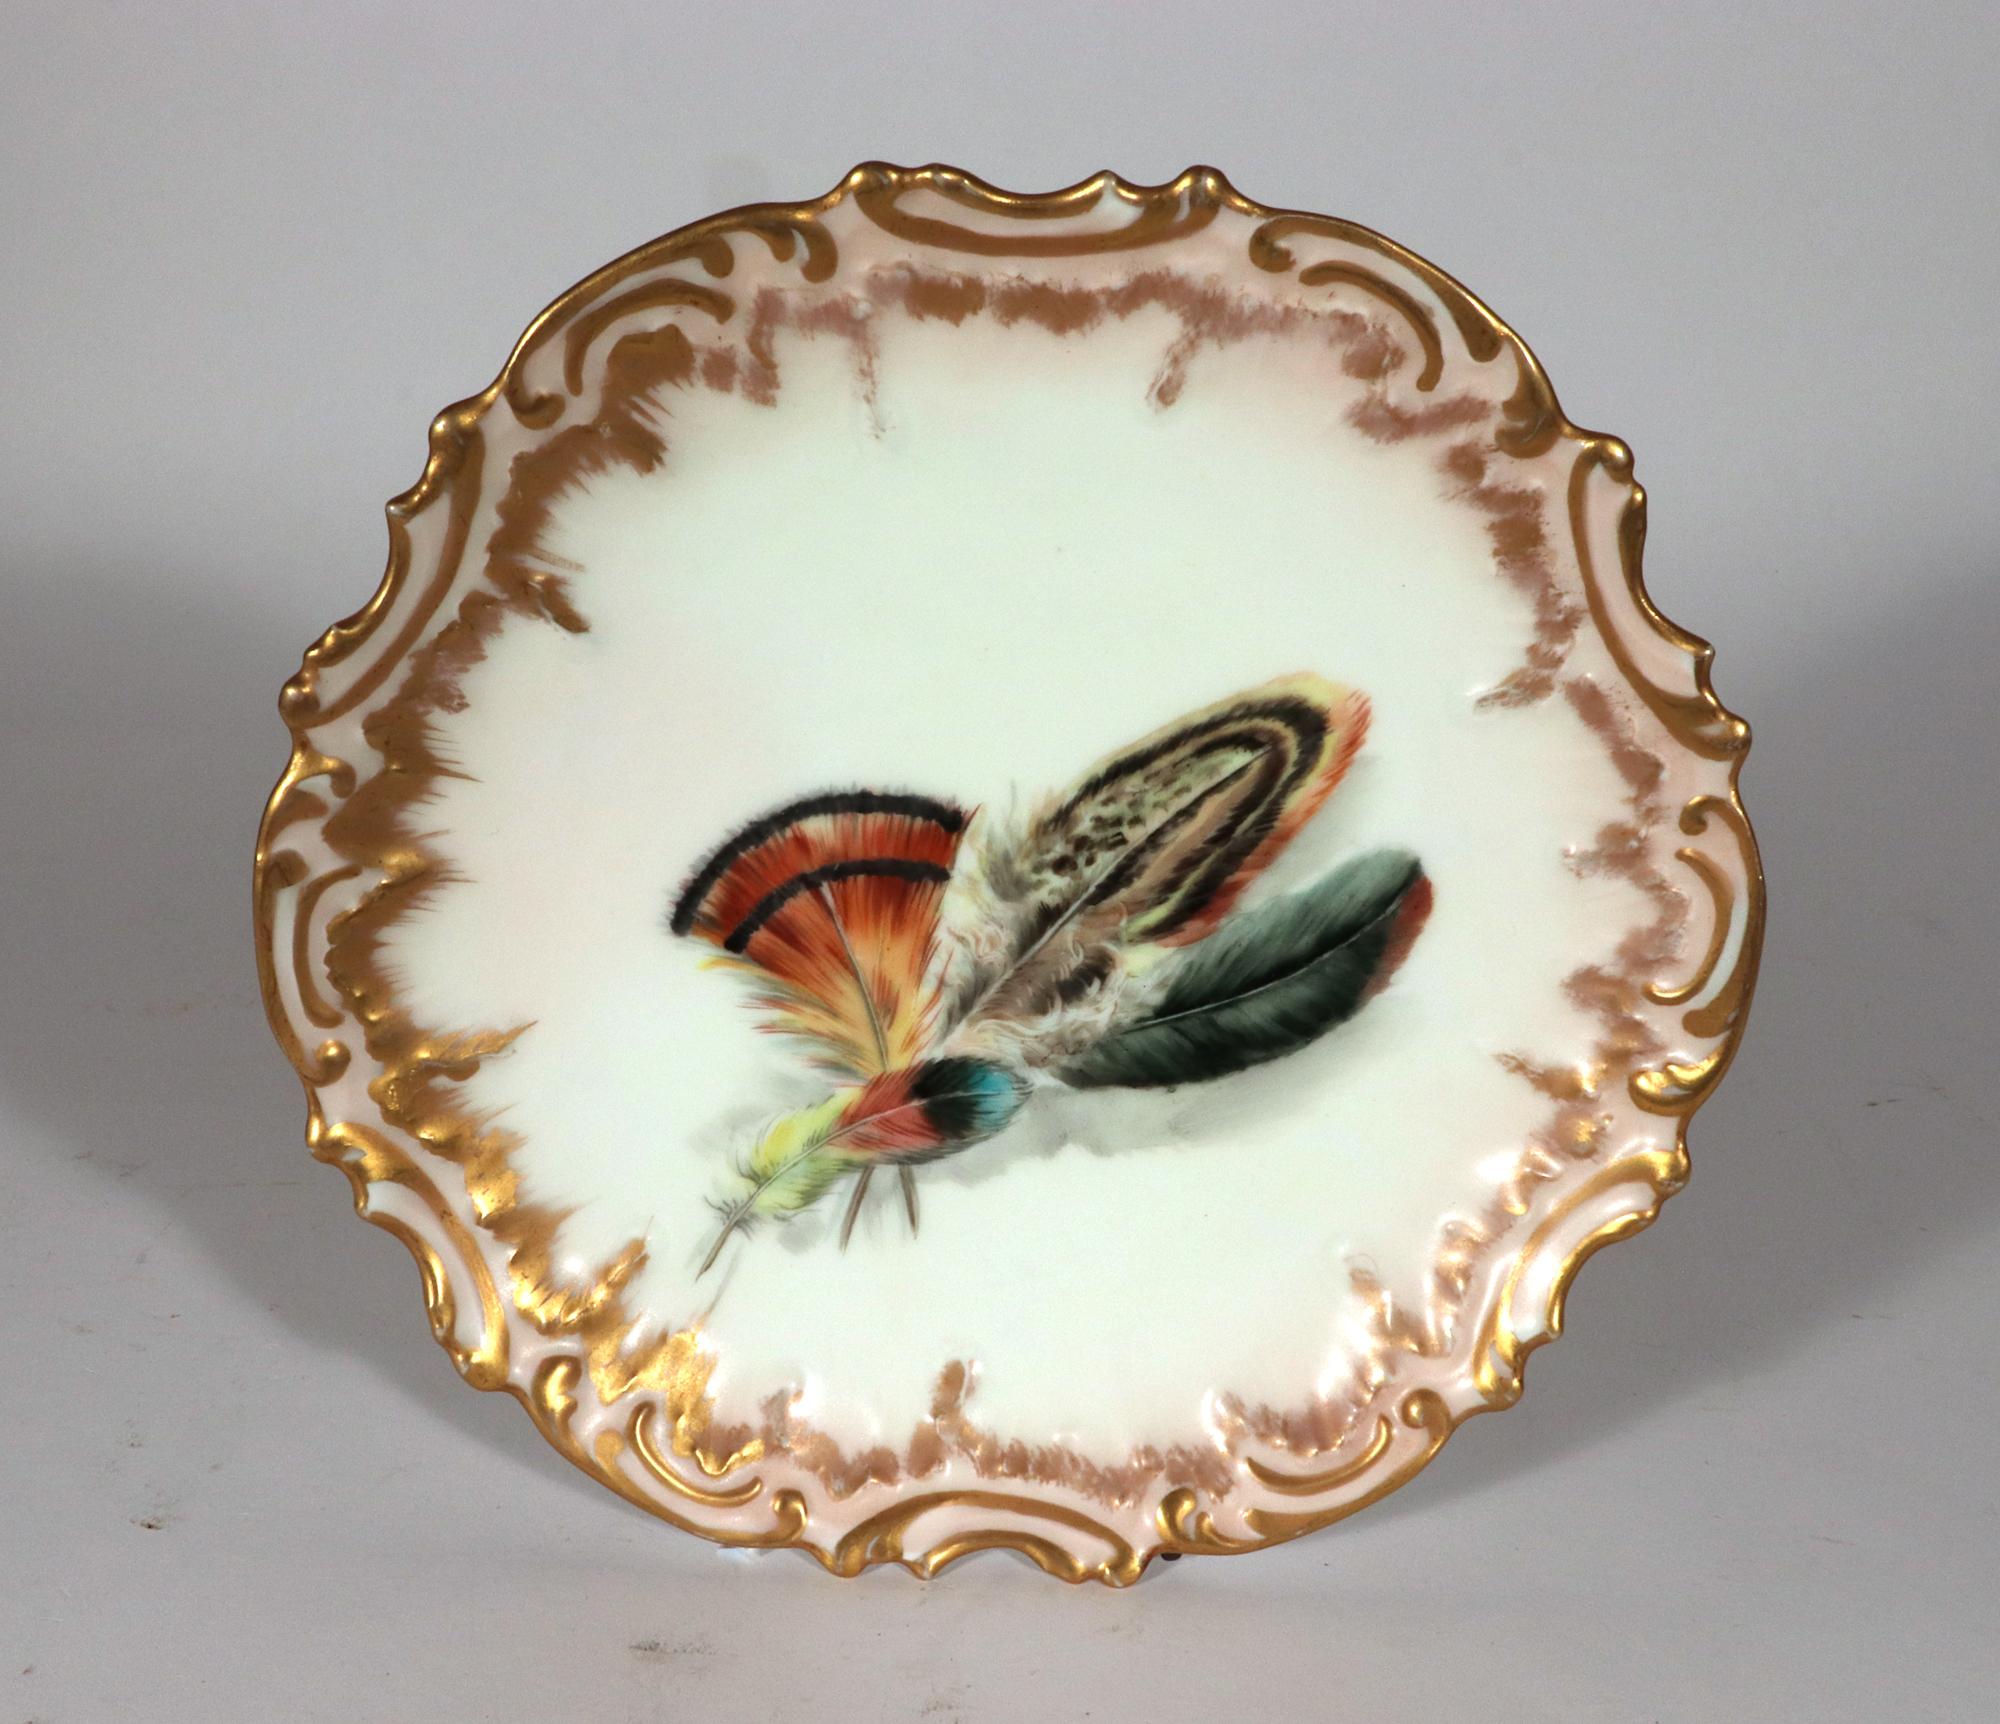 Limoges Porcelain Dessert Plates decorated with Feathers, Set of Ten 2